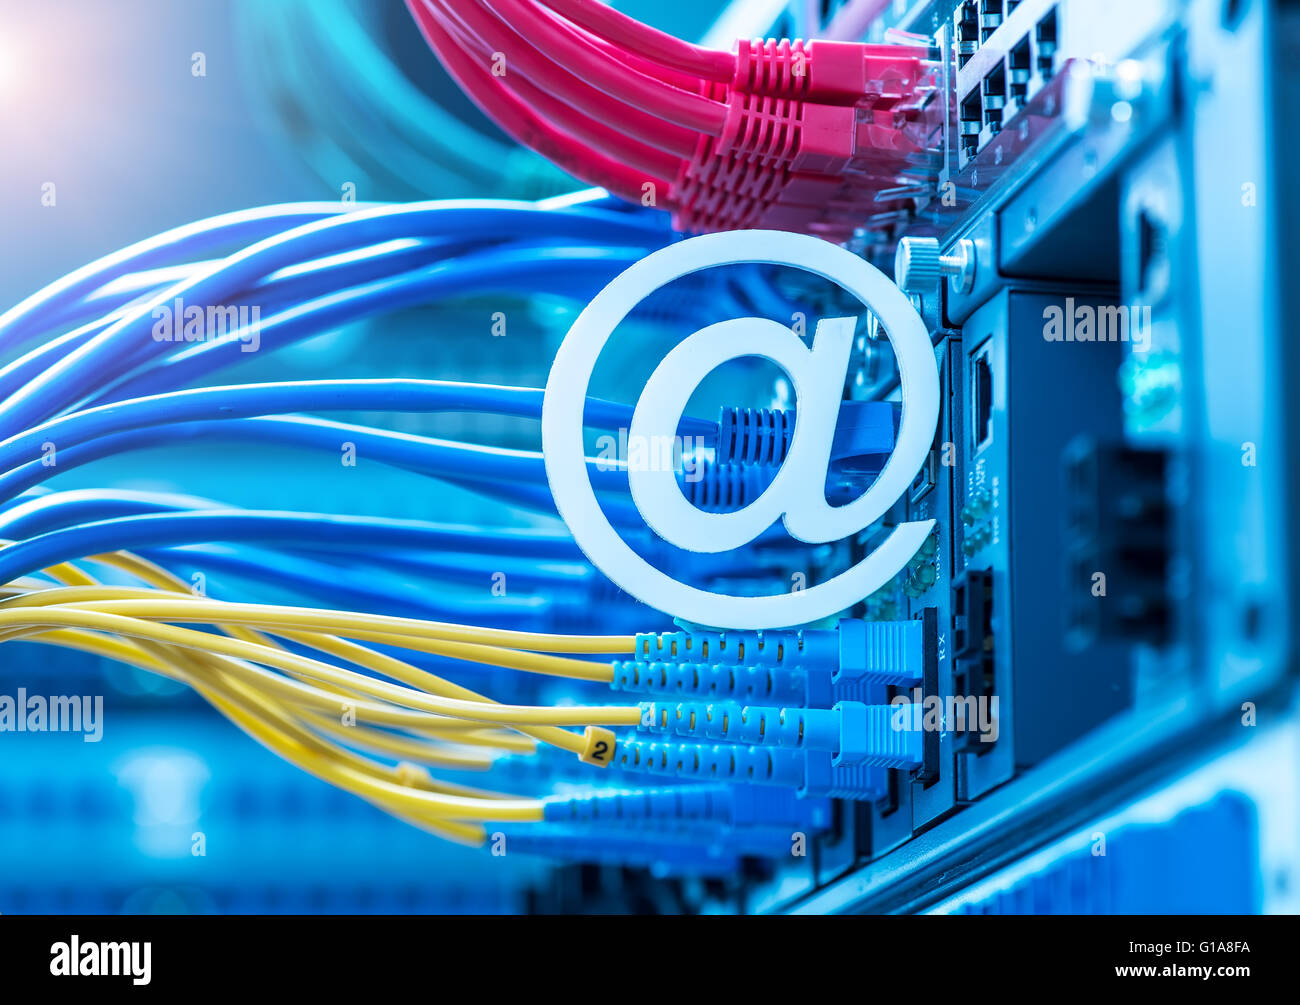 email symbol on Network switch and ethernet cables,Data Center Concept. Stock Photo